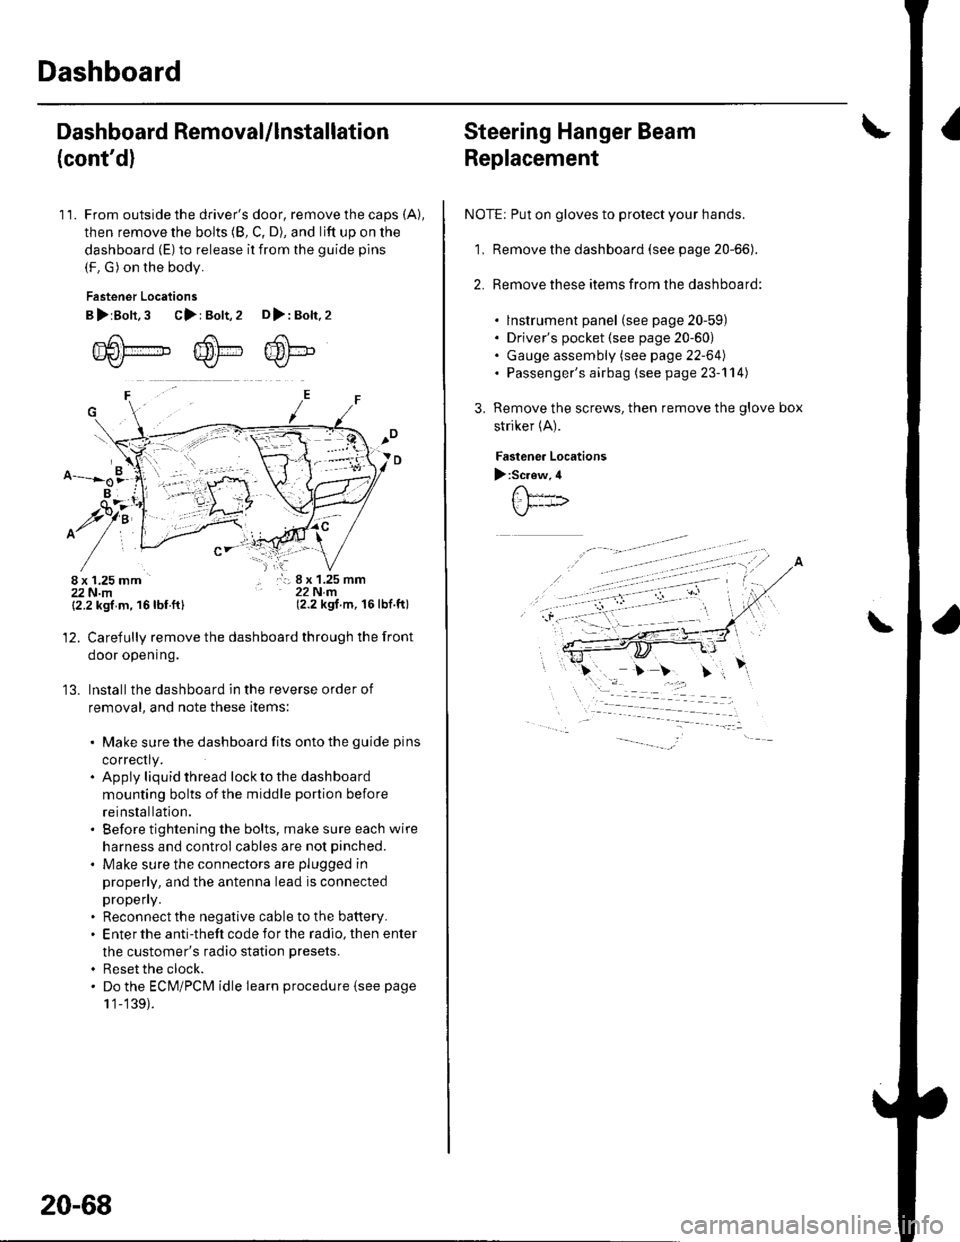 HONDA CIVIC 2003 7.G Owners Guide Dashboard
Dashboard Removal/lnstallation
(contd)
11. From outside the drivers door, remove the caps (A),
then remove the bolts (8, C, D), and lift up on the
dashboard (E) to release it from the guid